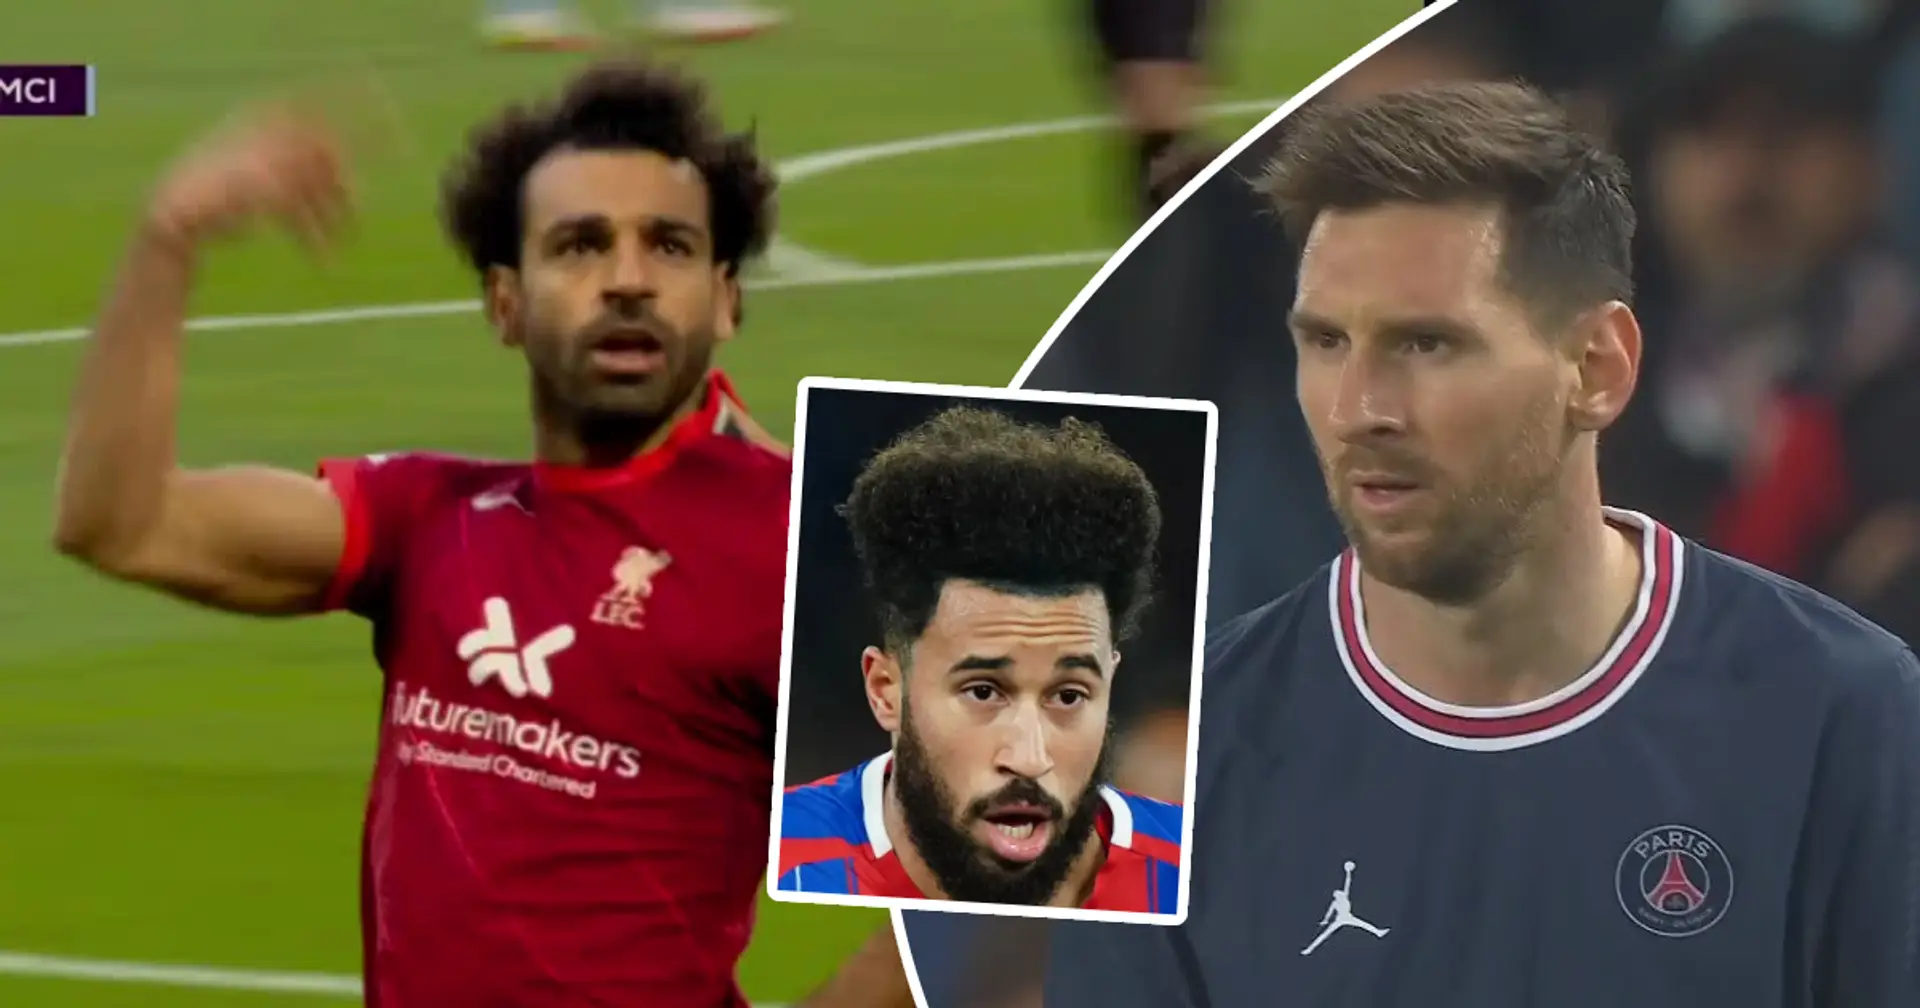 Everton forward Townsend: 'I don't agree Salah is closest we've got to Messi'